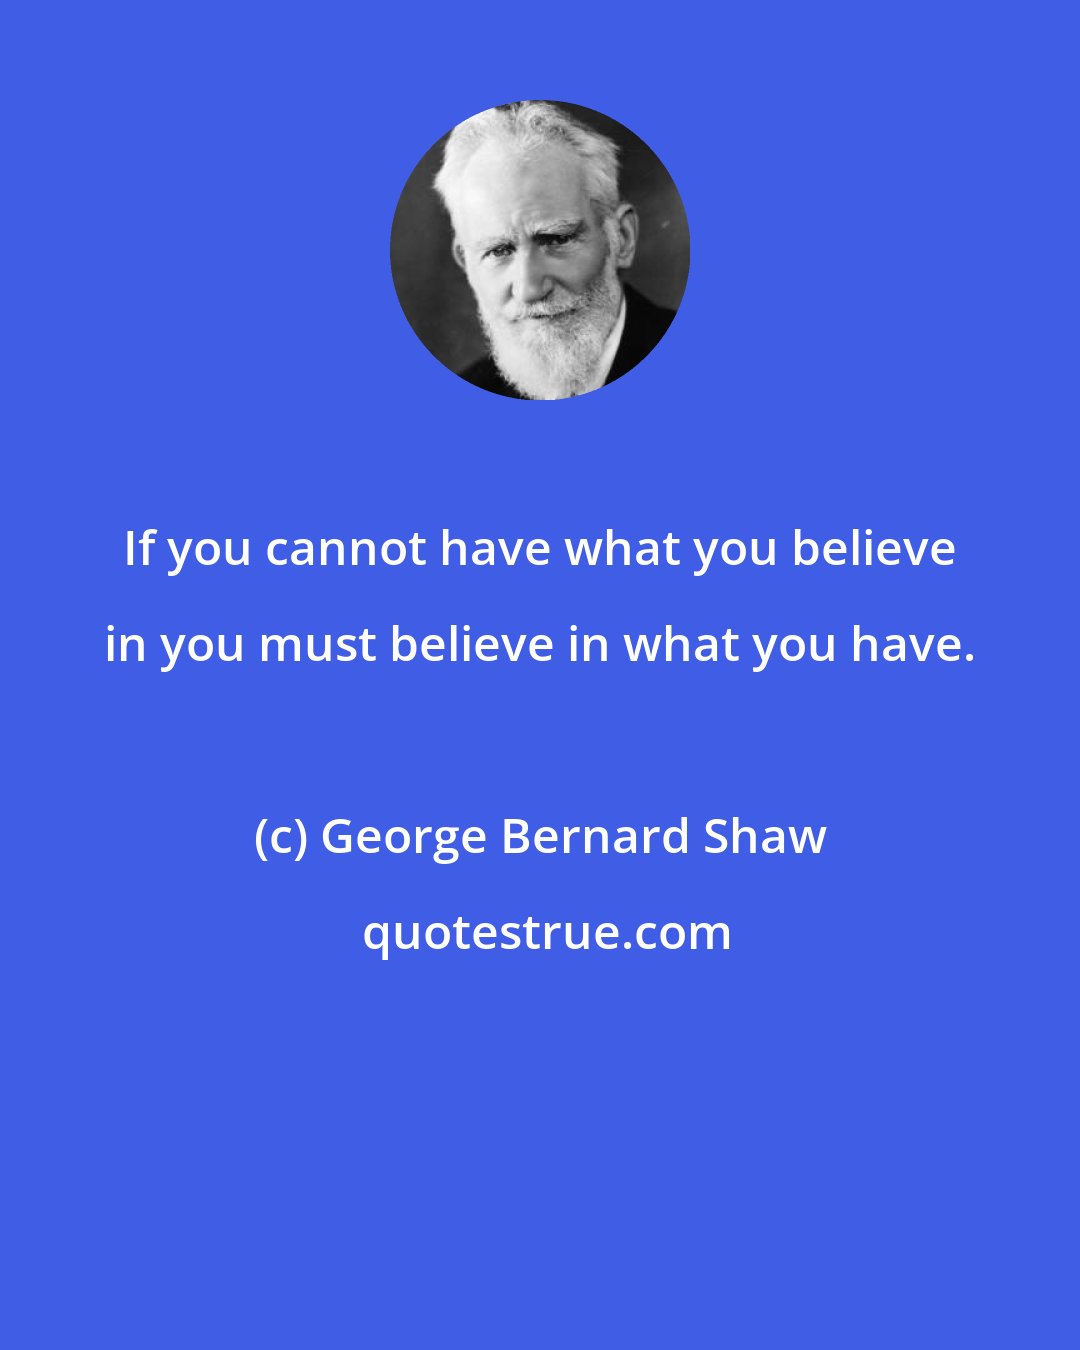 George Bernard Shaw: If you cannot have what you believe in you must believe in what you have.